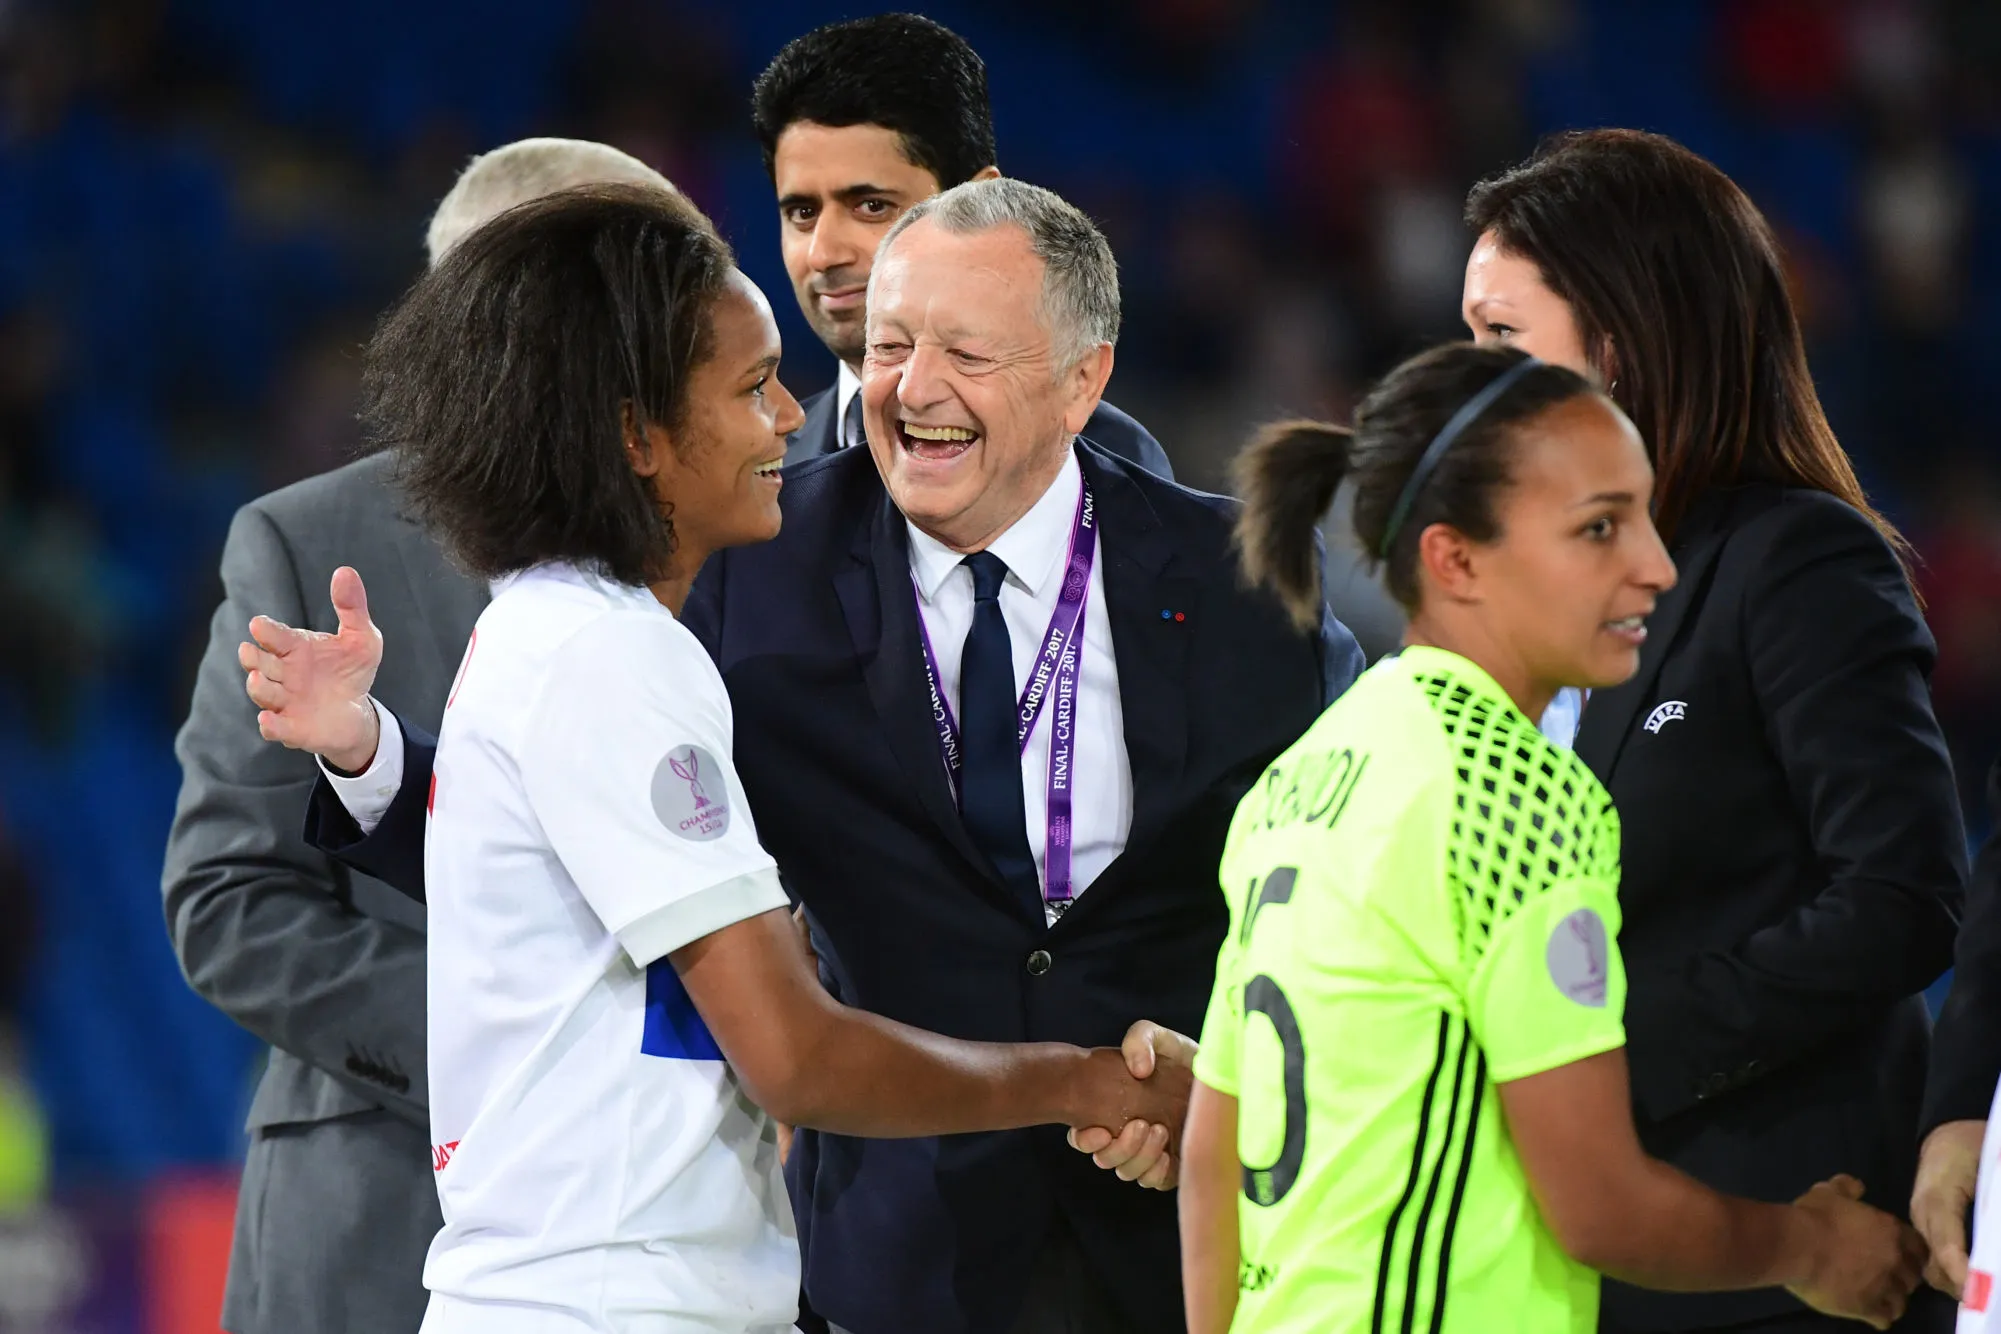 PSG President Nasser Al Khelaifi looks Lyon president Jean Michel Aulas celebrates with captain Wendie Renard of Lyon after their teams wins the final of the UEFA Women&rsquo;s Champions League match between Olympique Lyonnais and Paris Saint-Germain at Cardiff City Stadium on June 1, 2017 in Cardiff, Wales. (Photo by Dave Winter/Icon Sport)